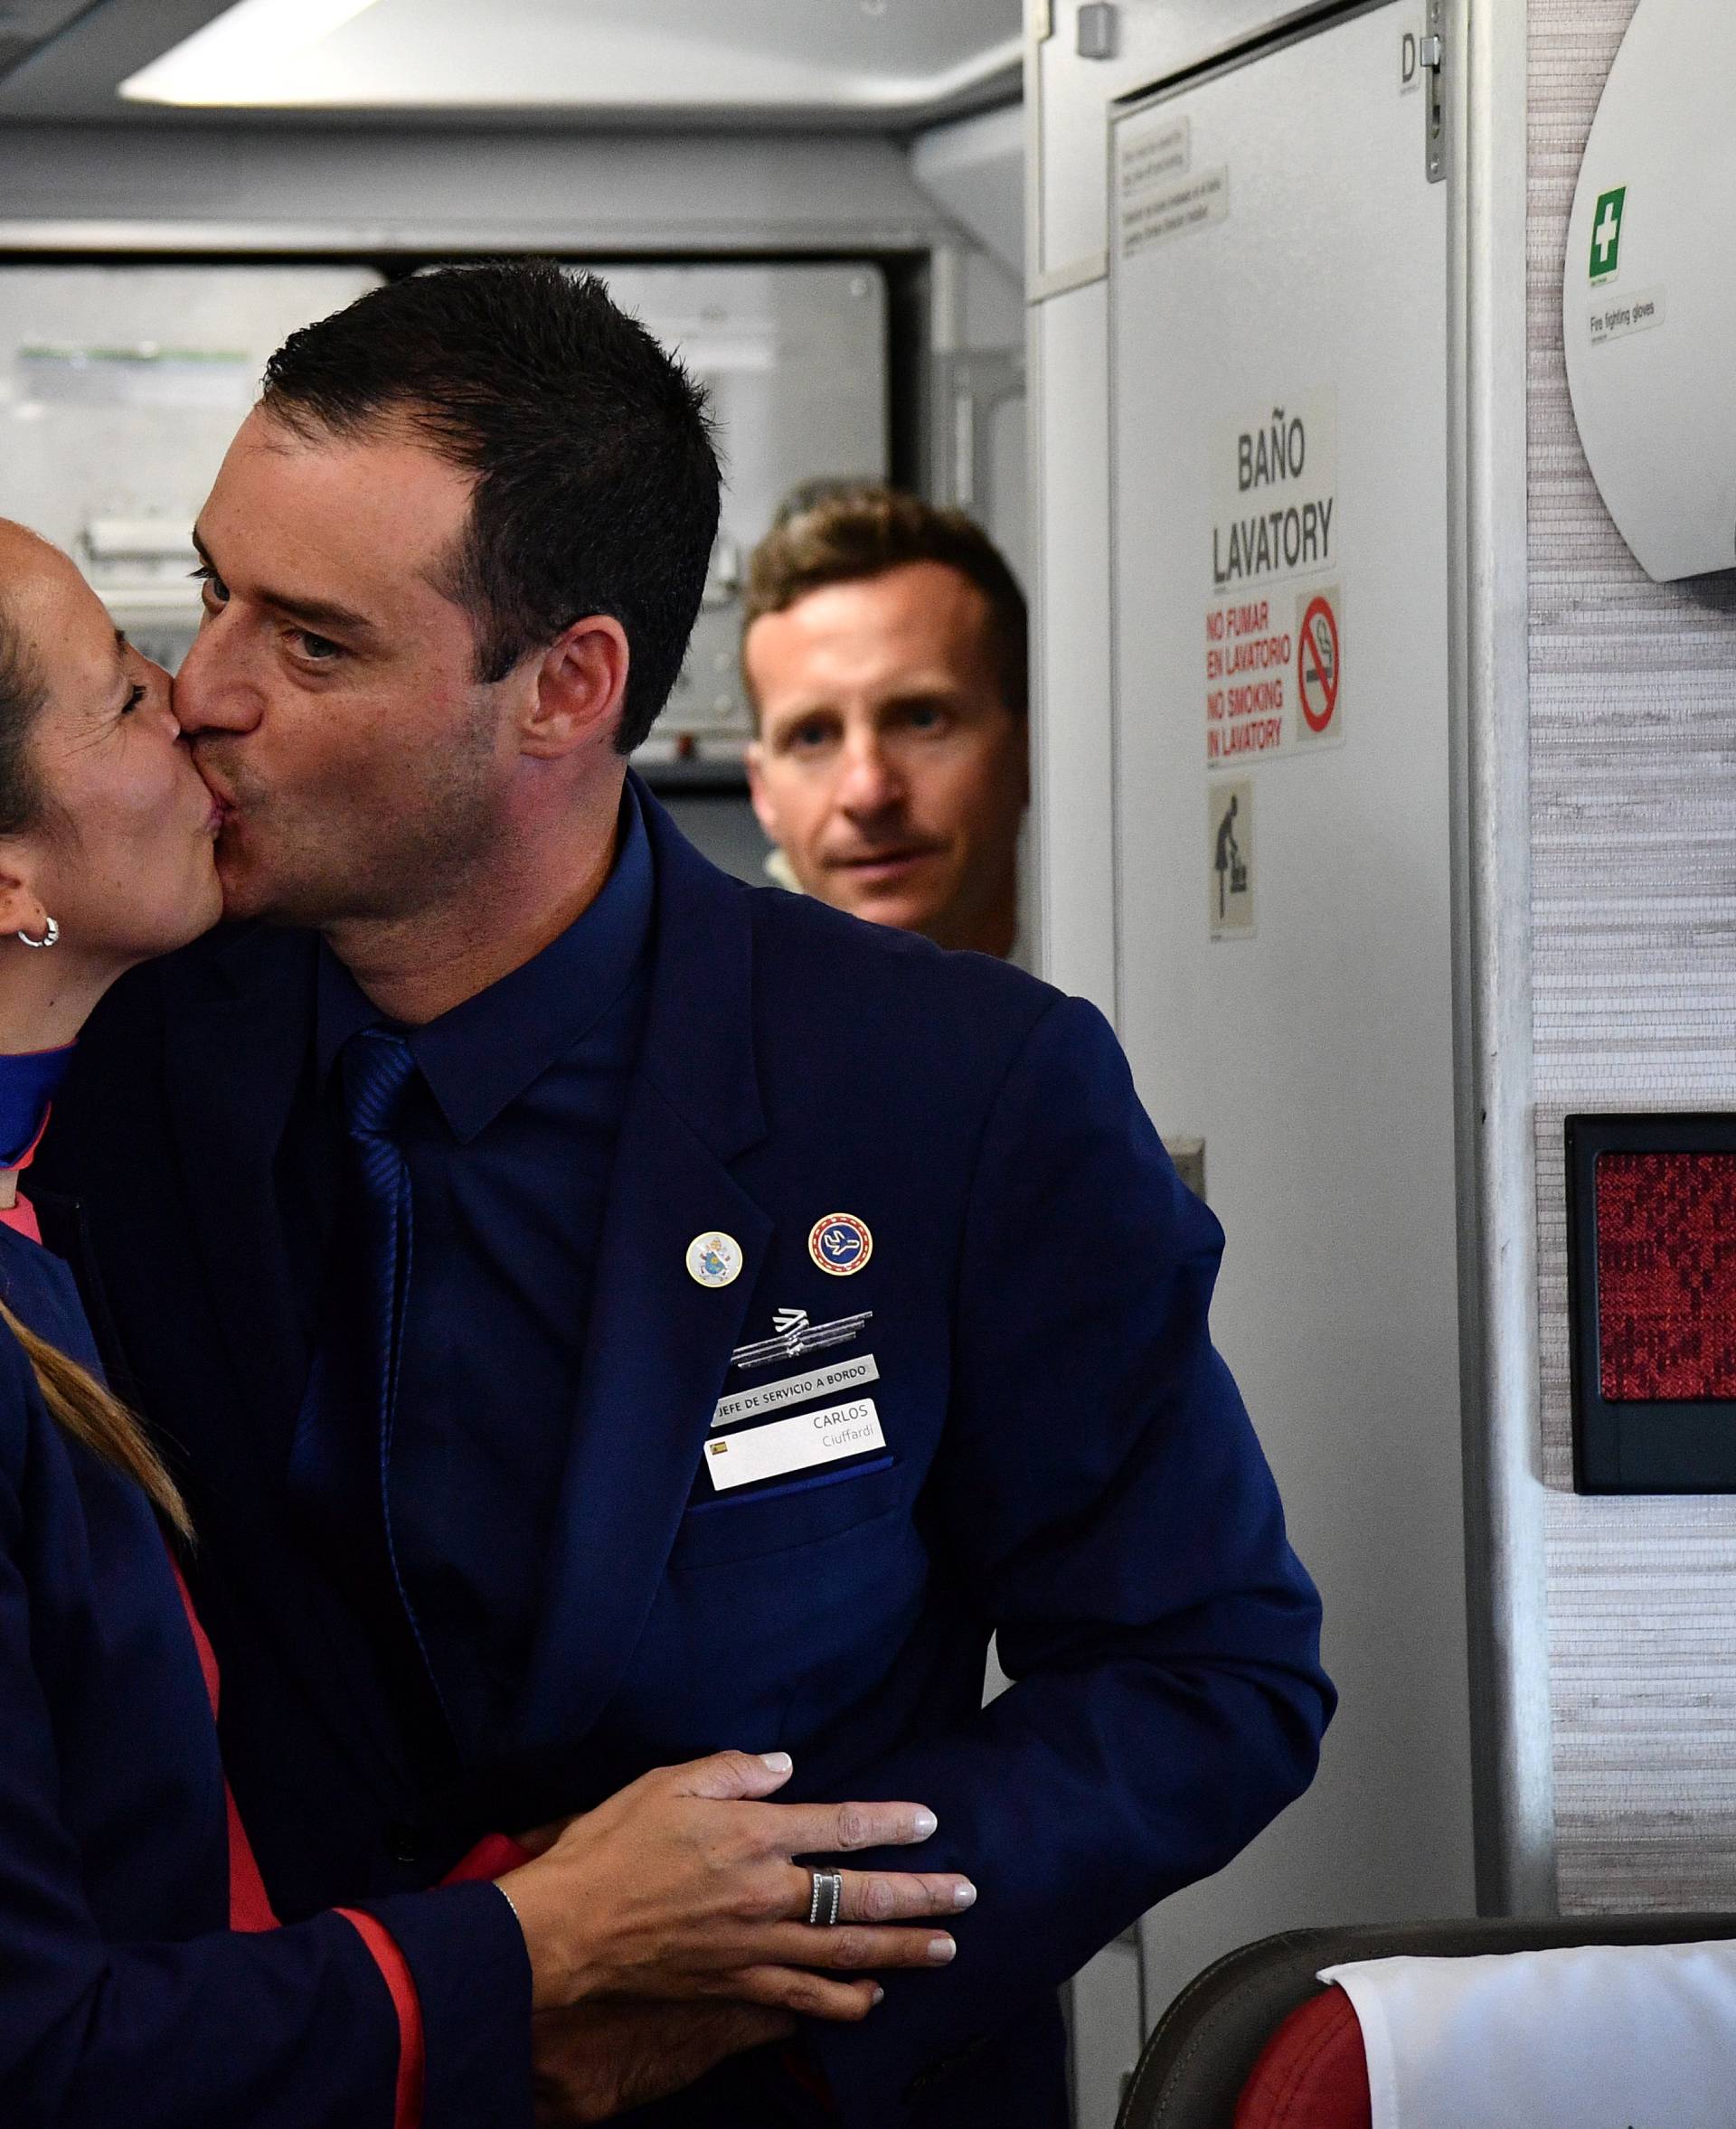 Crew members Paula Podest and Carlos Ciufffardi kiss after being married on board by Pope Francis during the flight between Santiago and the northern city of Iquique